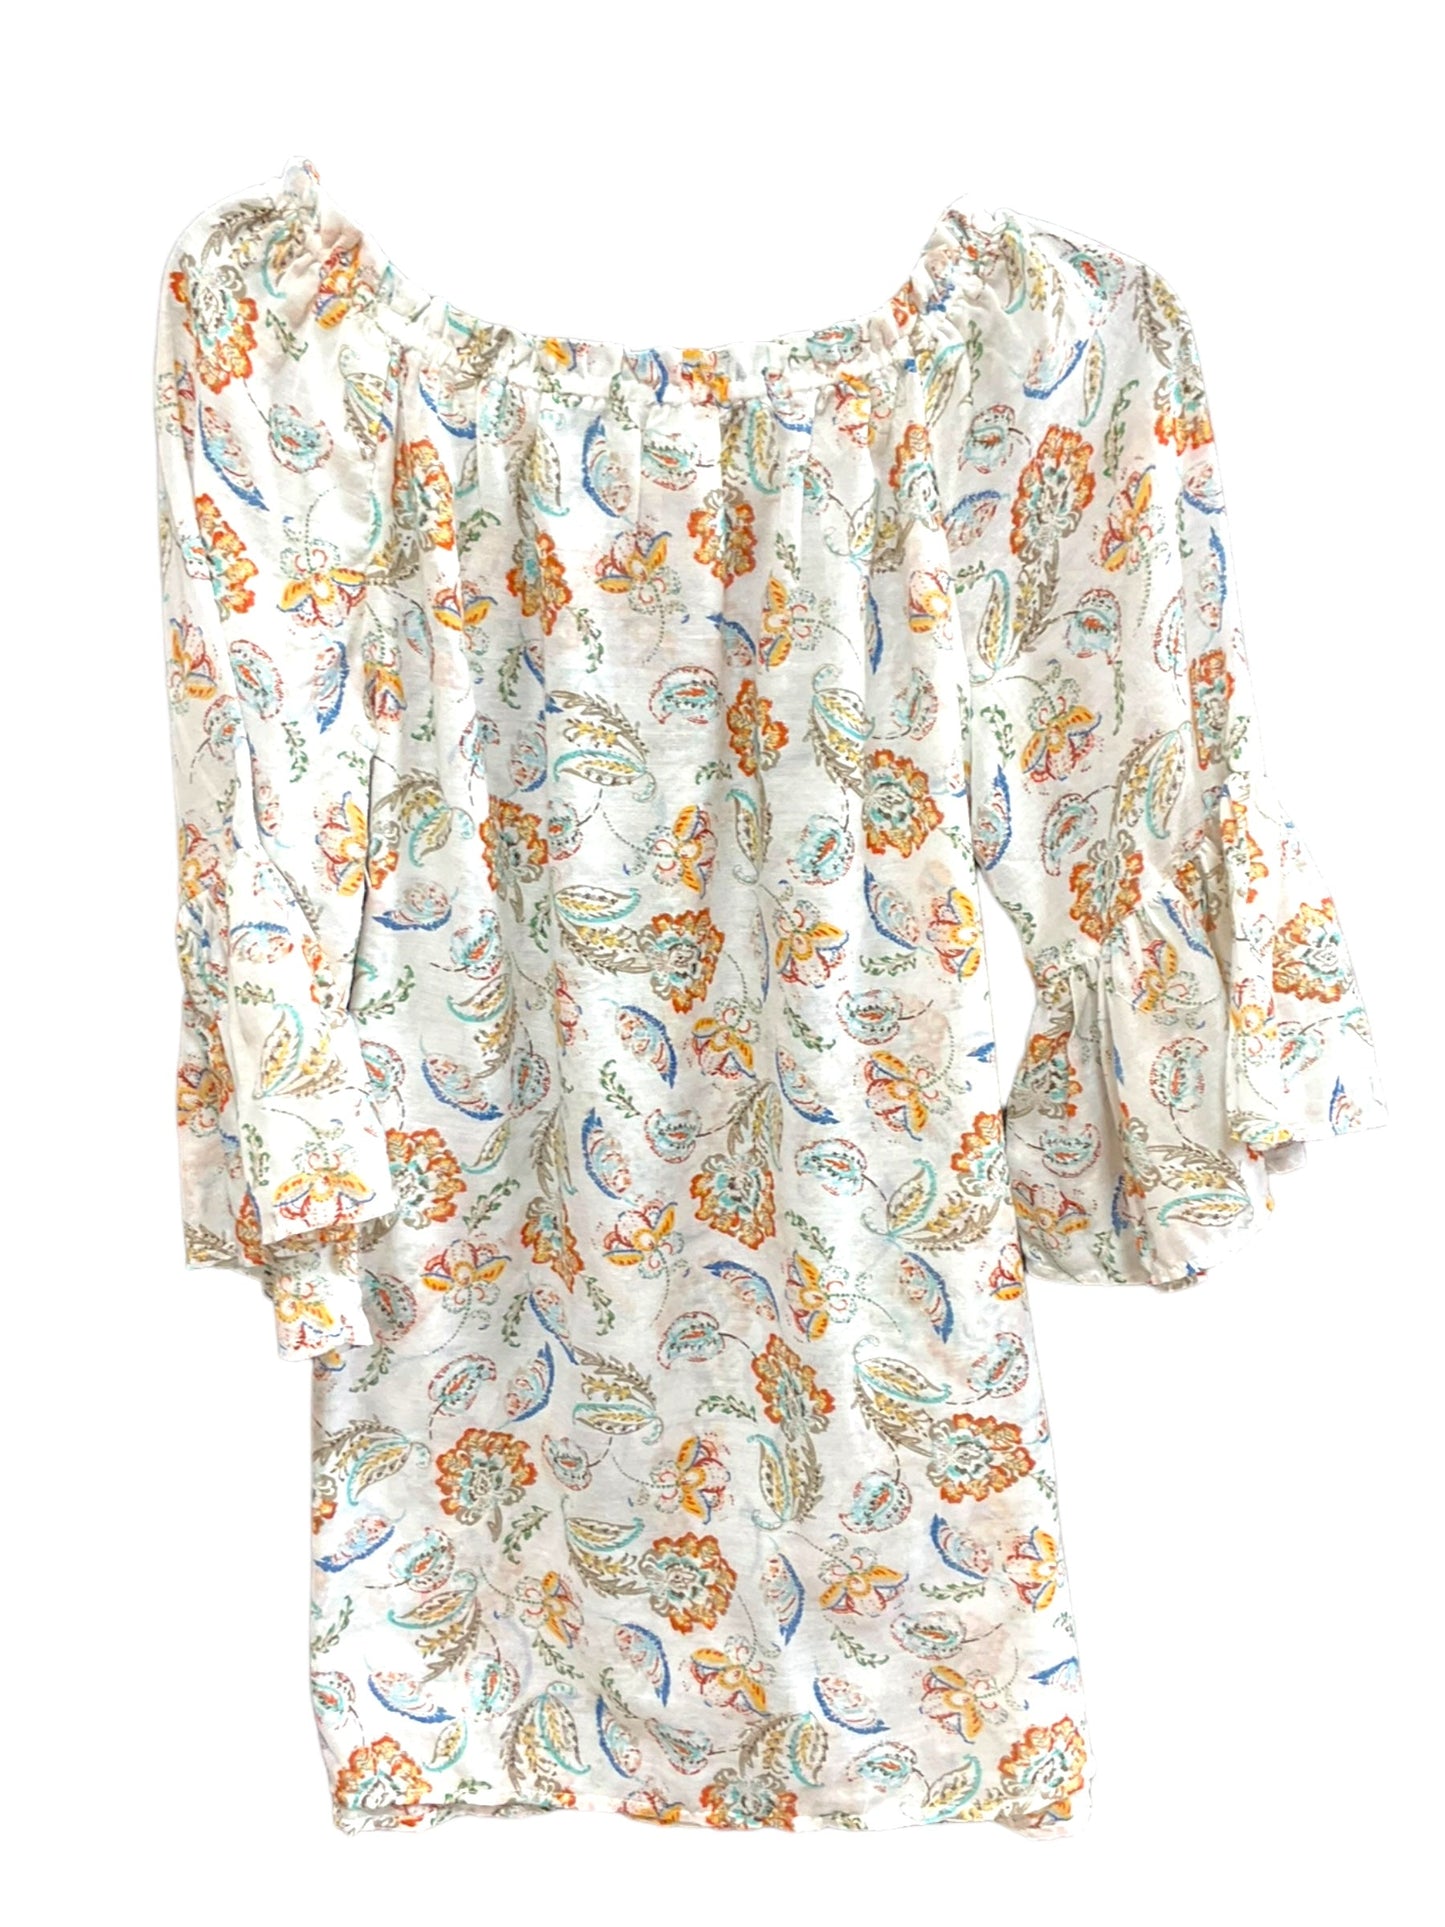 Floral Print Swimwear Cover-up Beachlunchlounge, Size S